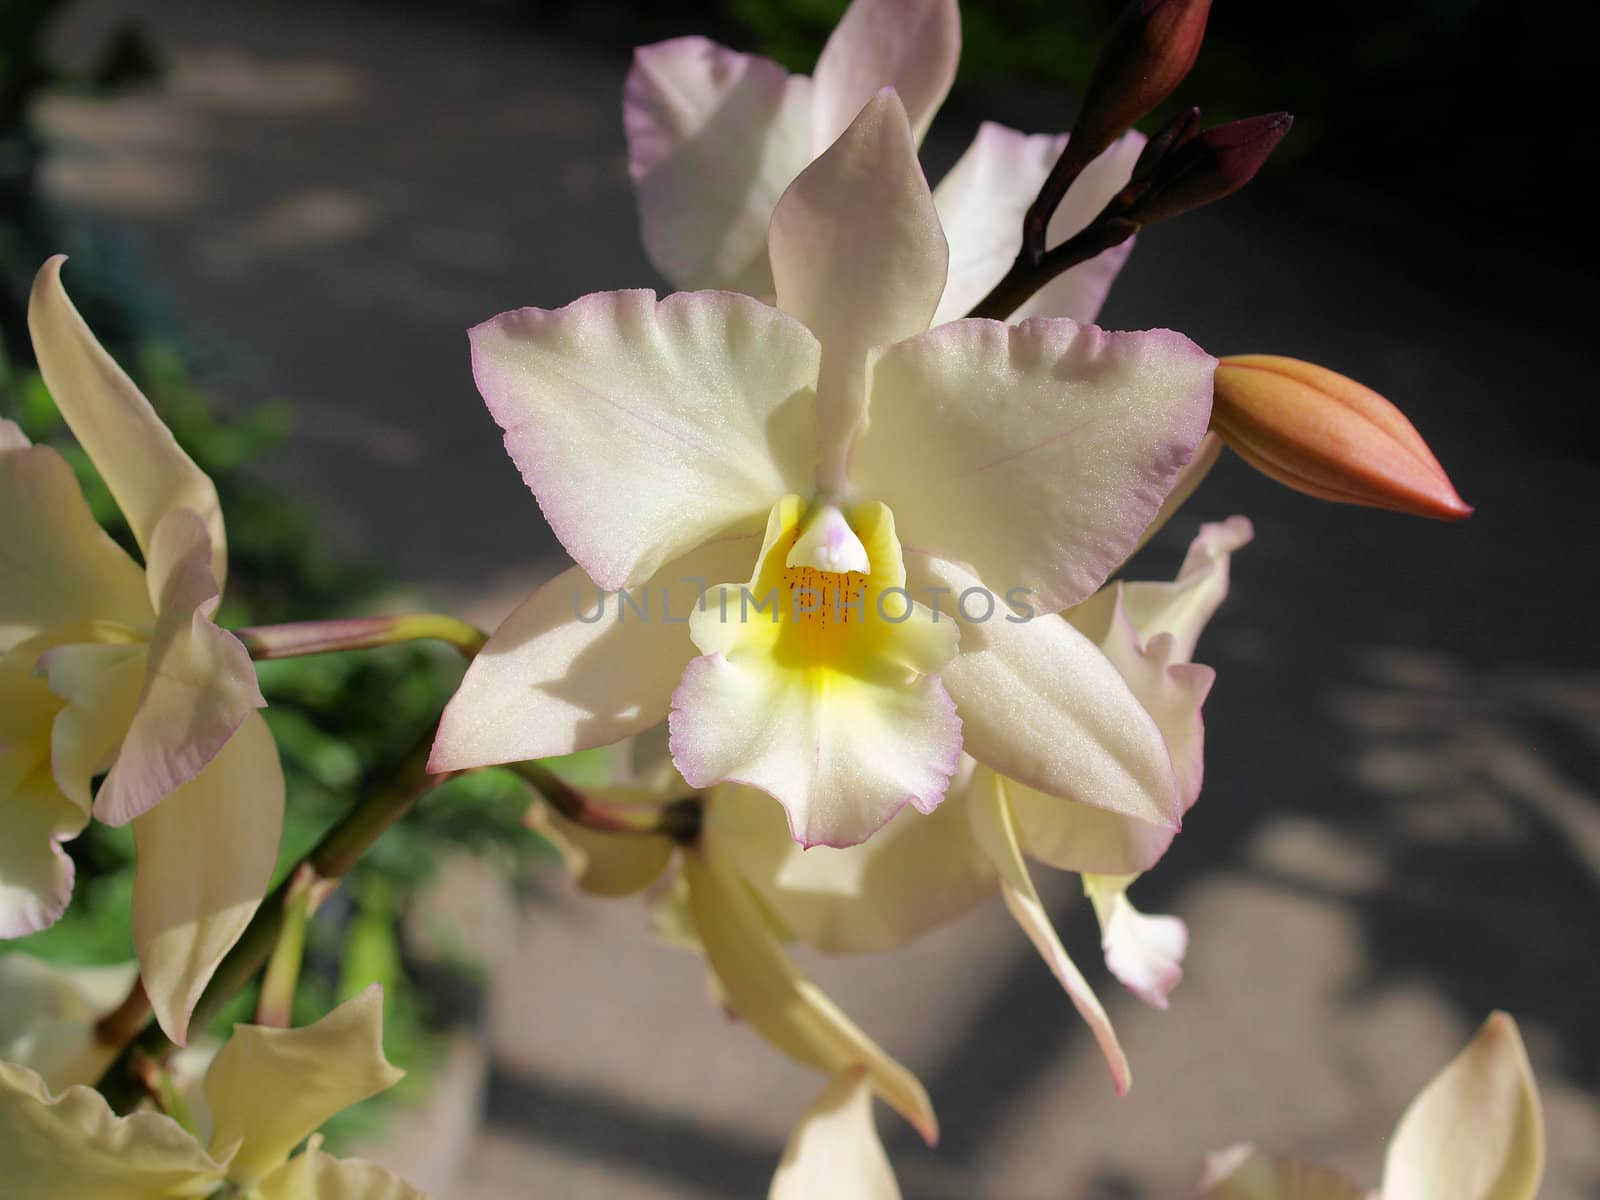 A large white orchid shown up close